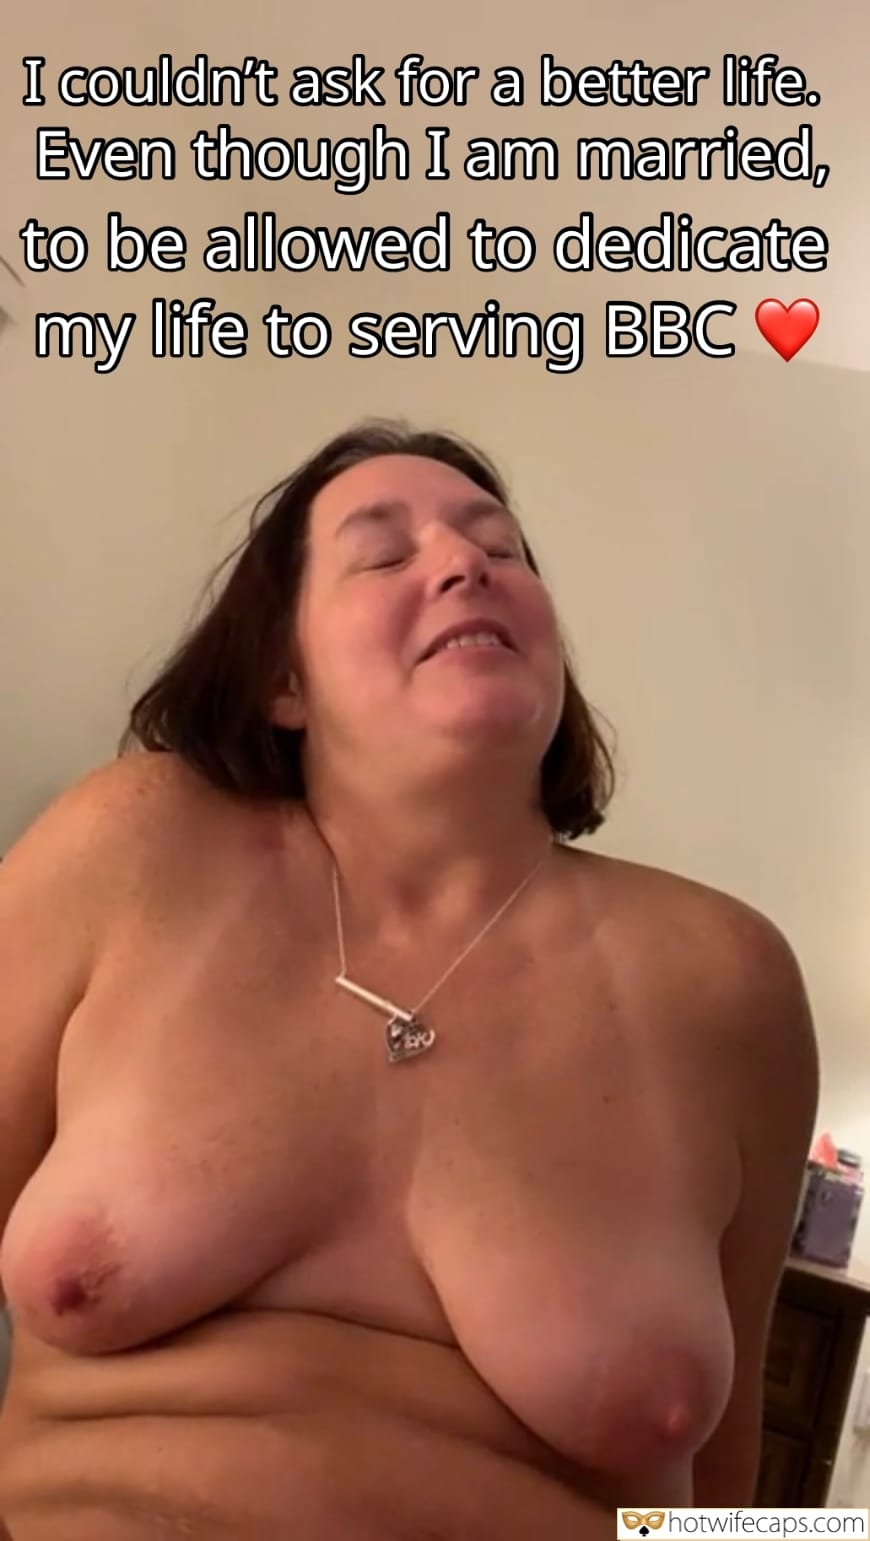 Wife Sharing BBC hotwife caption: I couldn’t ask for a better life. Even though I am married, to be allowed to dedicate my life to serving BBC V 7hotwifecaps.com Mature Slut Made for Serving BBC